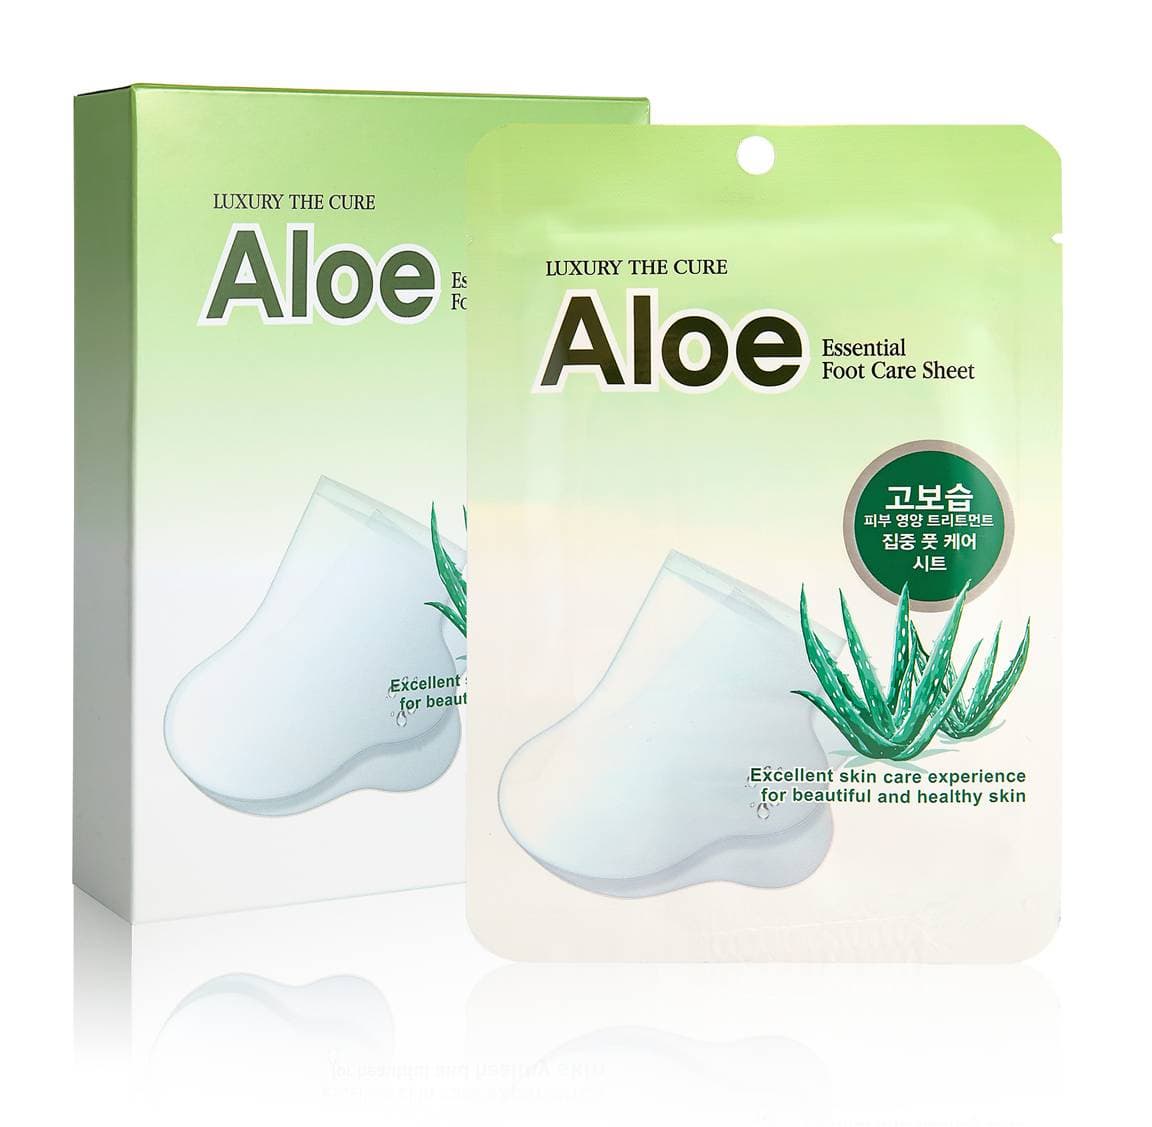 Luxury The Cure Aloe Essential Foot Care Sheet